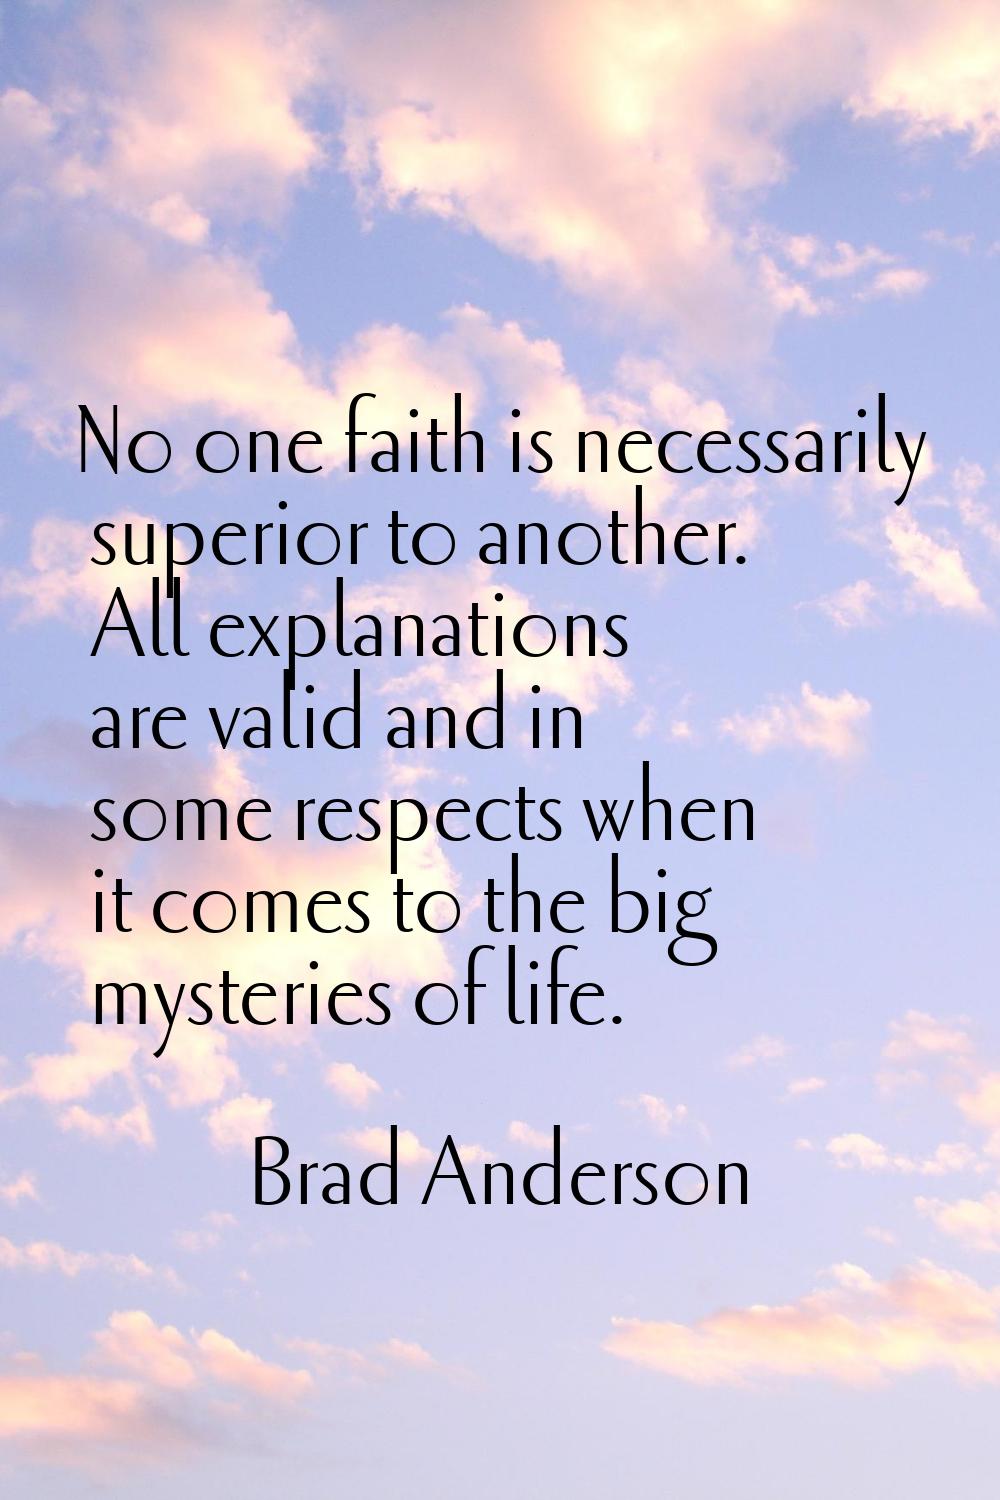 No one faith is necessarily superior to another. All explanations are valid and in some respects wh